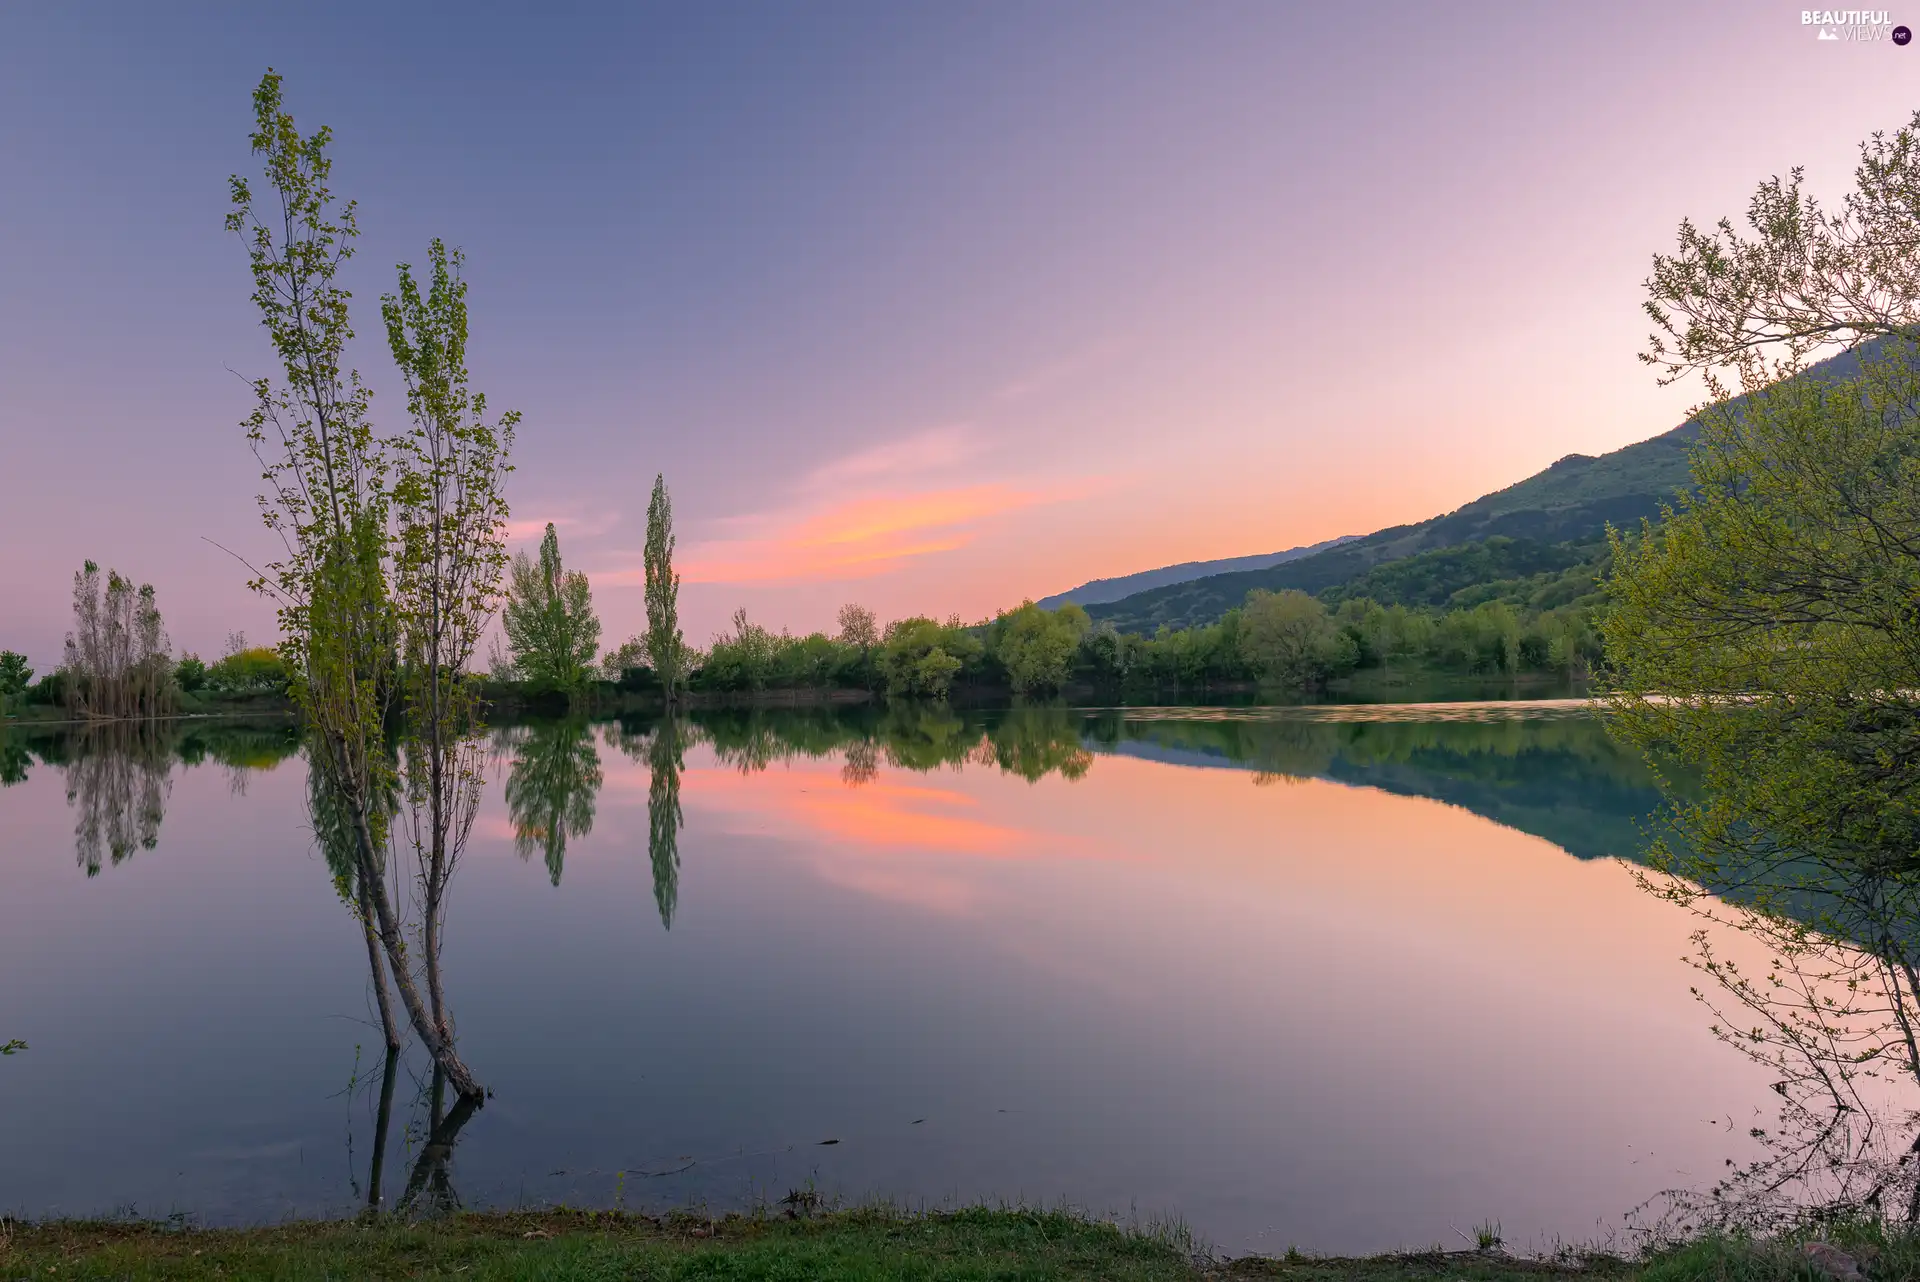 Mountains, morning, viewes, reflection, trees, lake